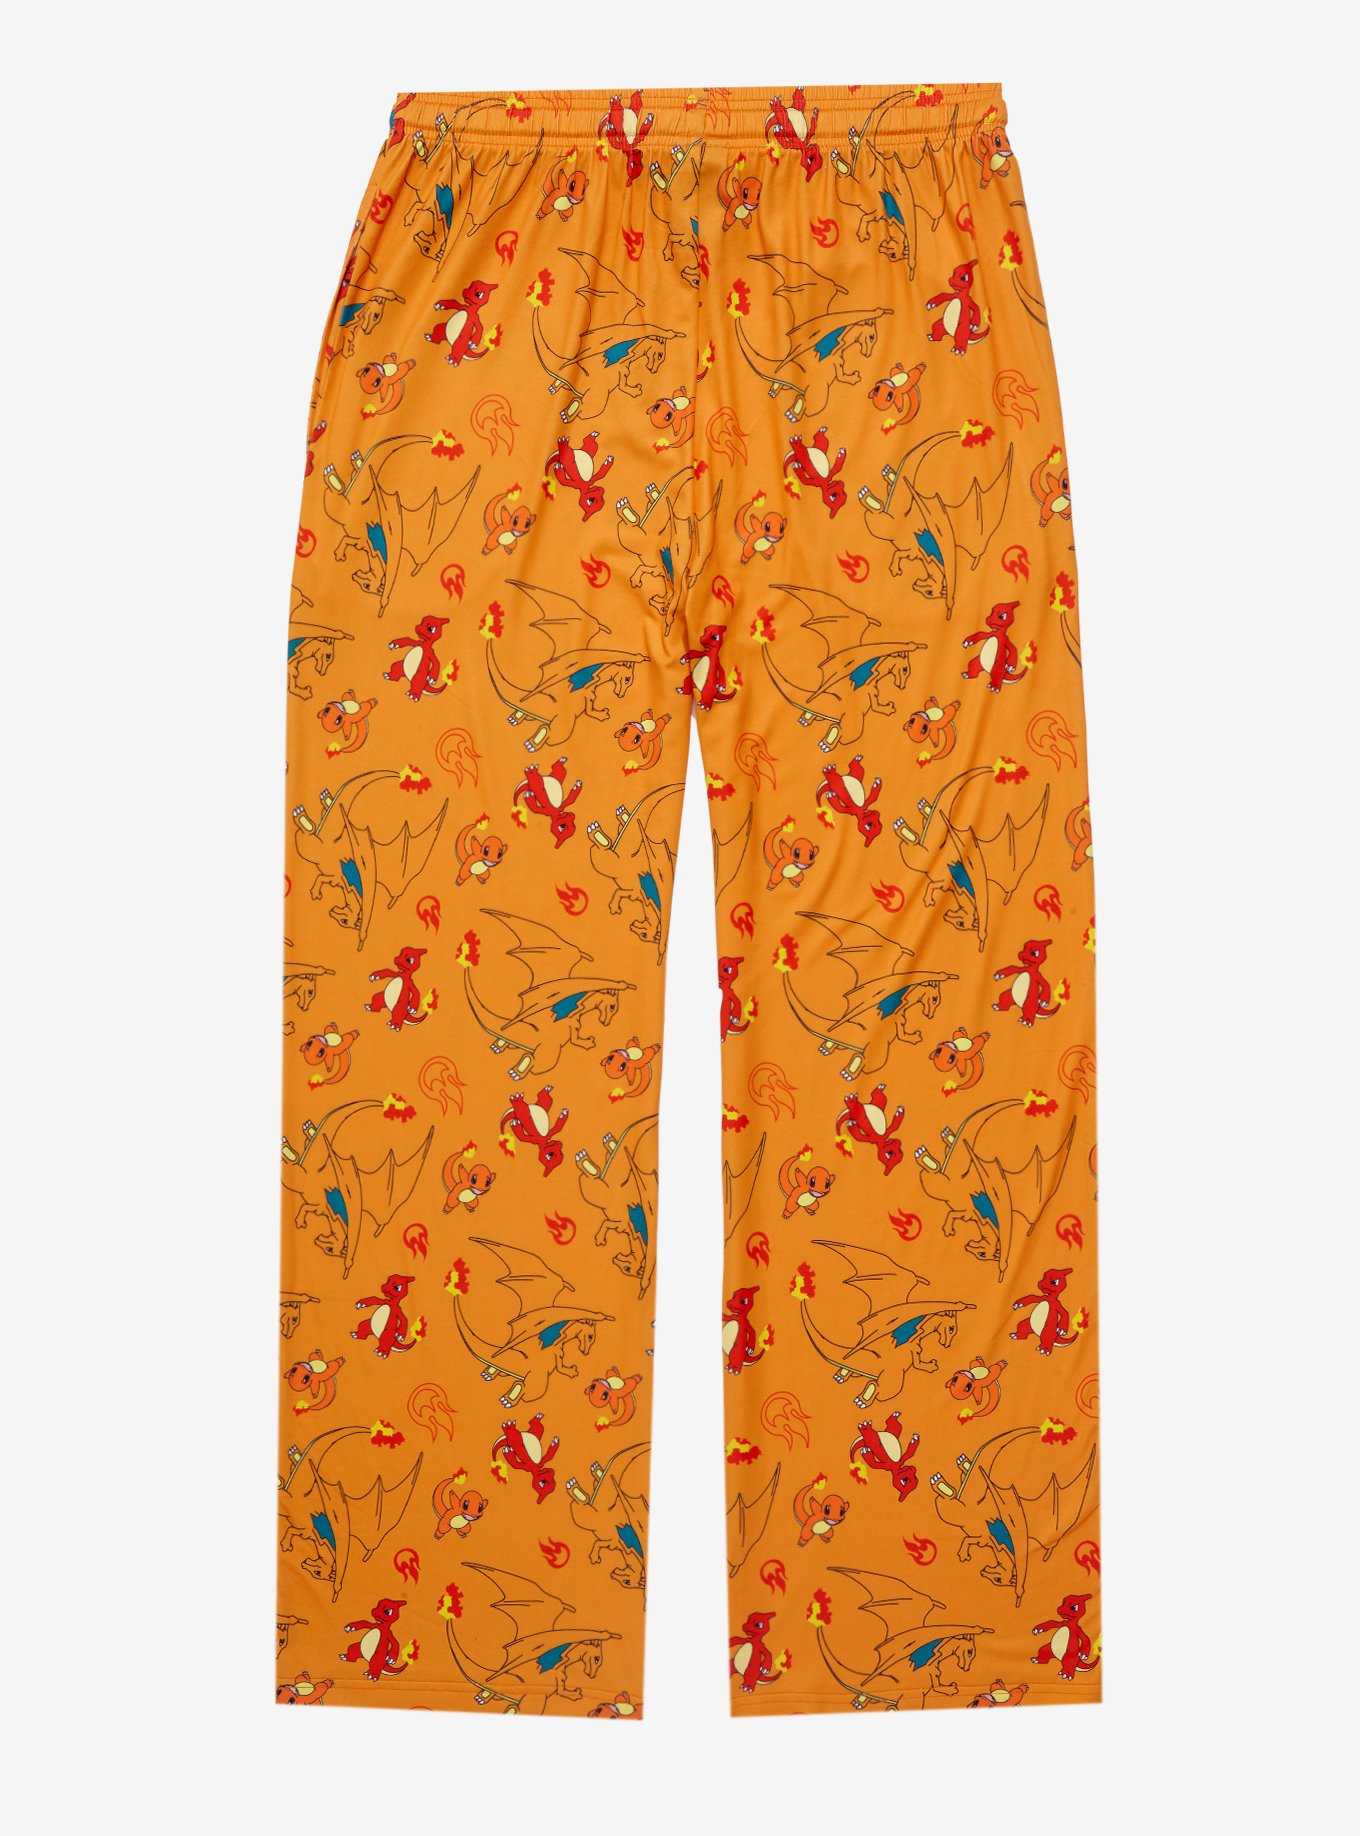 Pokémon Fire Type Evolutions Allover Print Sleep Pants - BoxLunch Exclusive, , hi-res